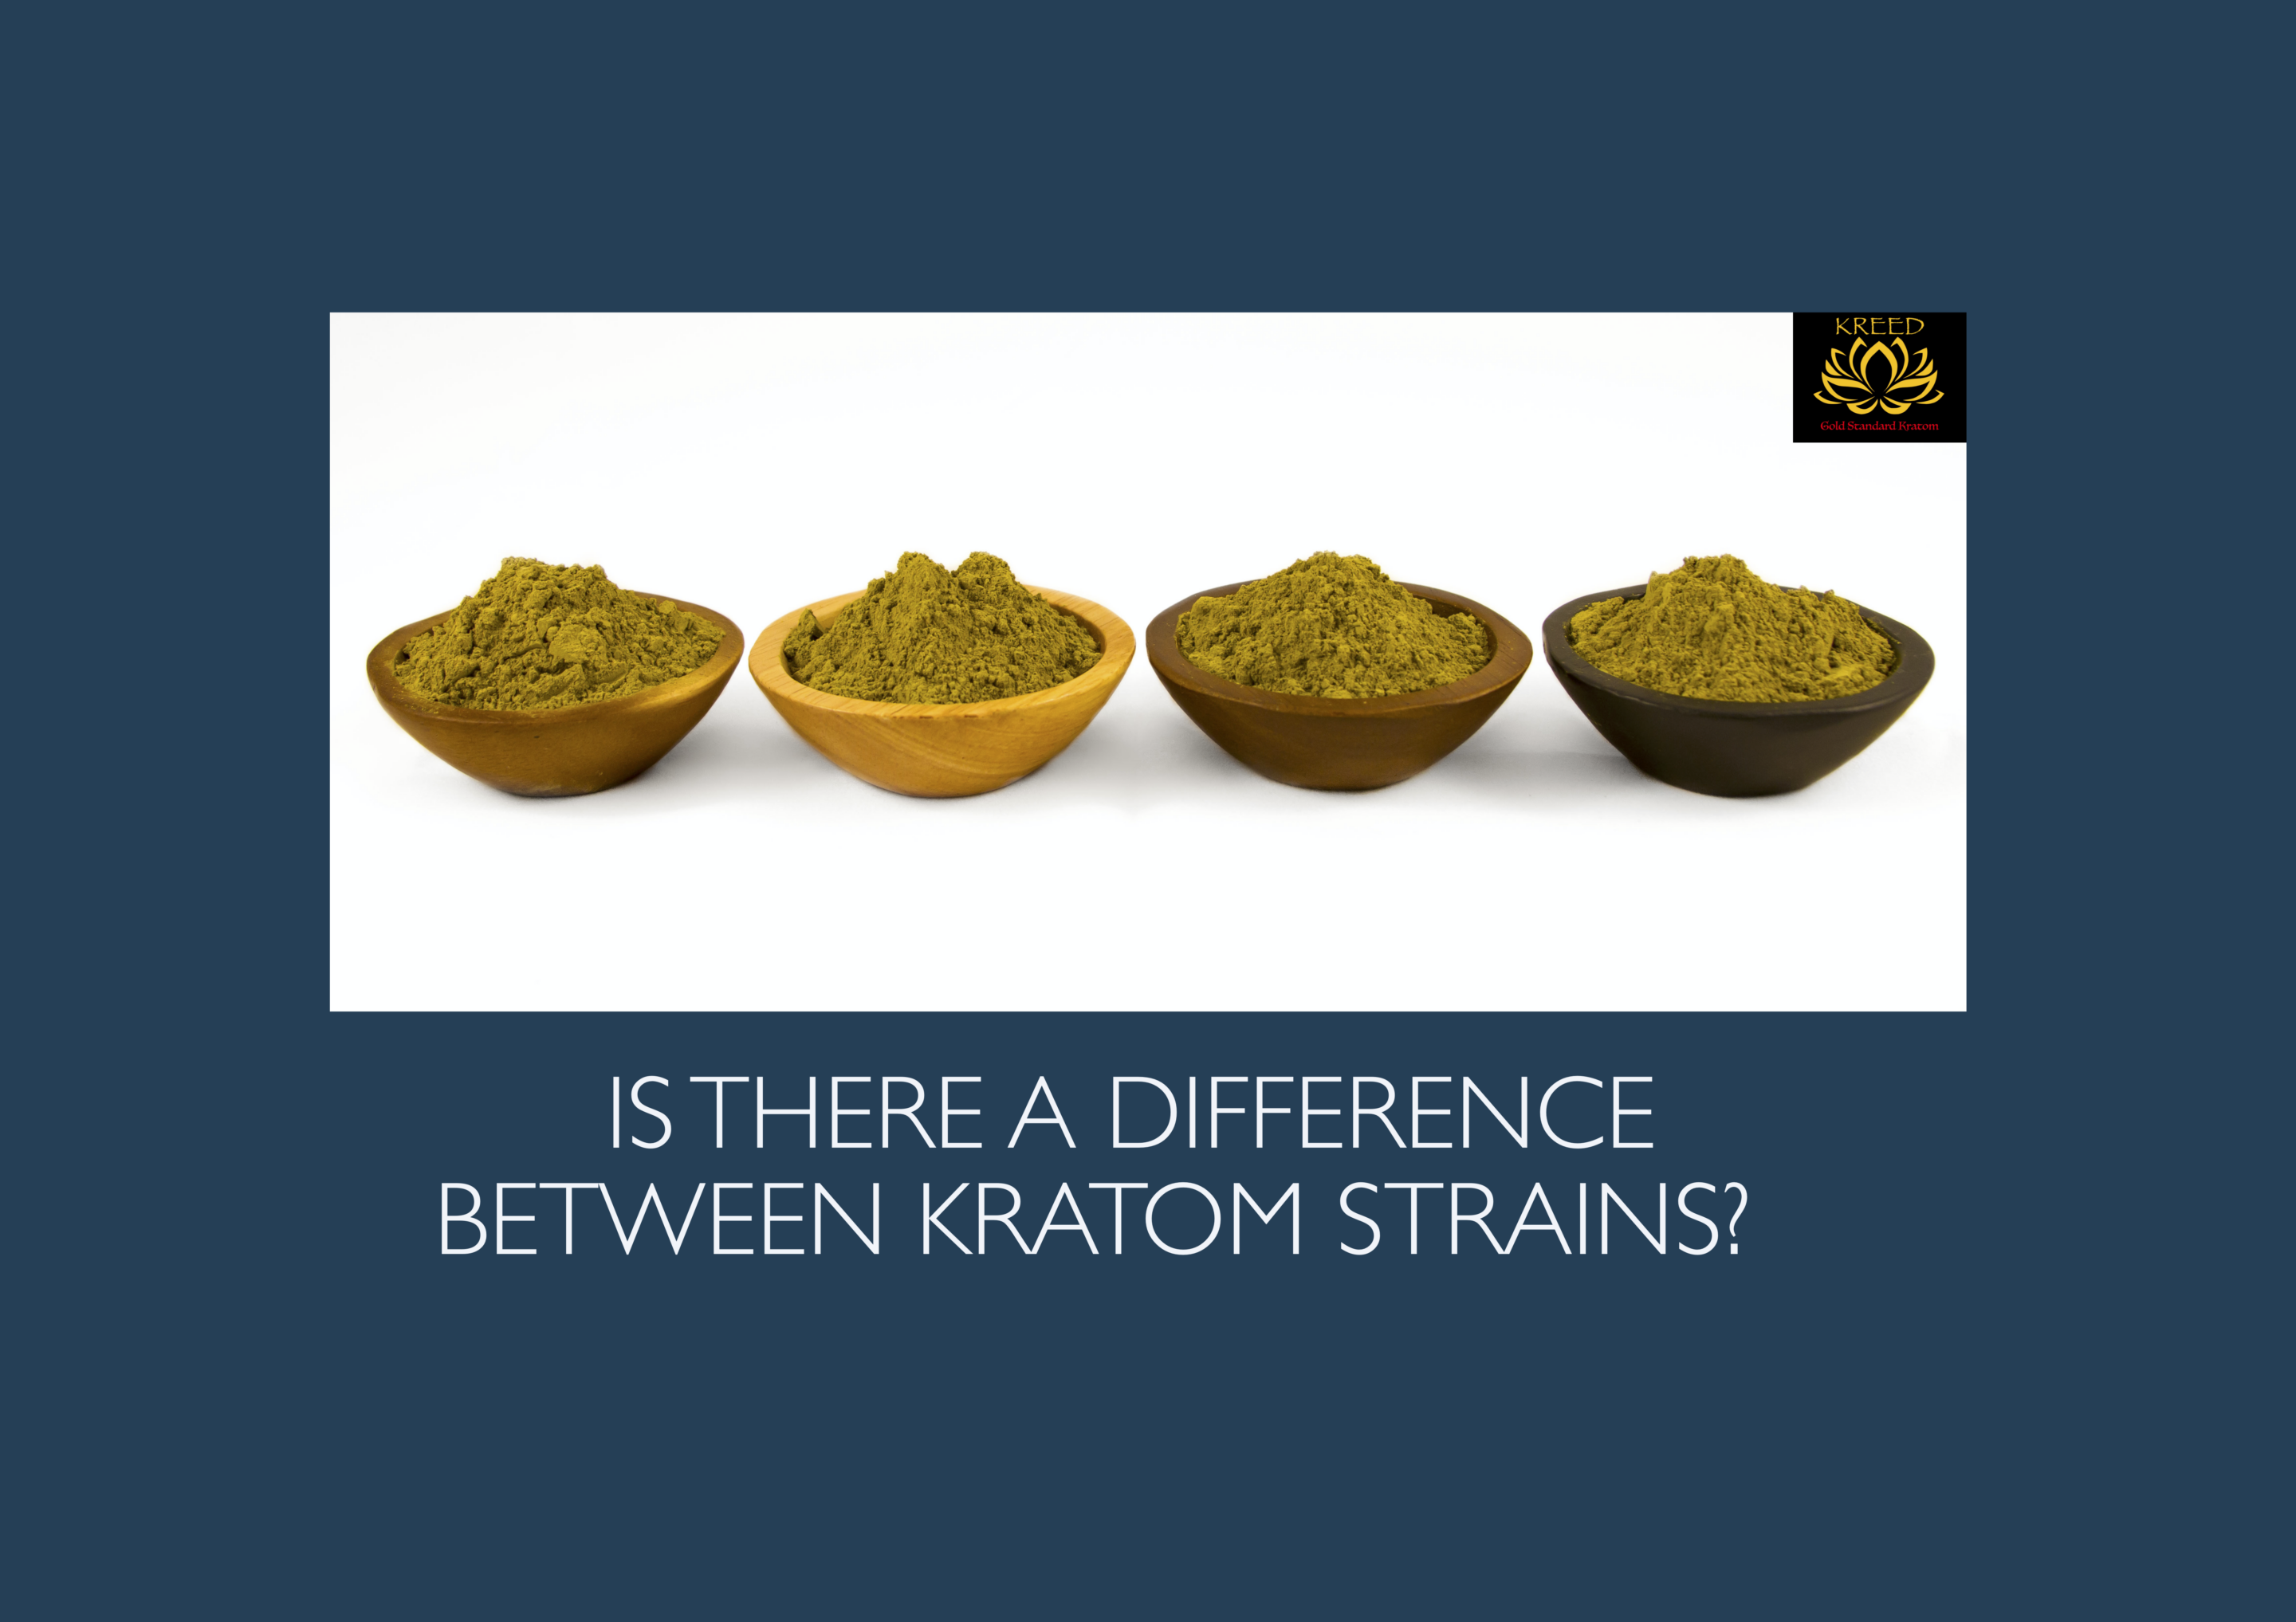 Is There a Difference Between Kratom Strains?